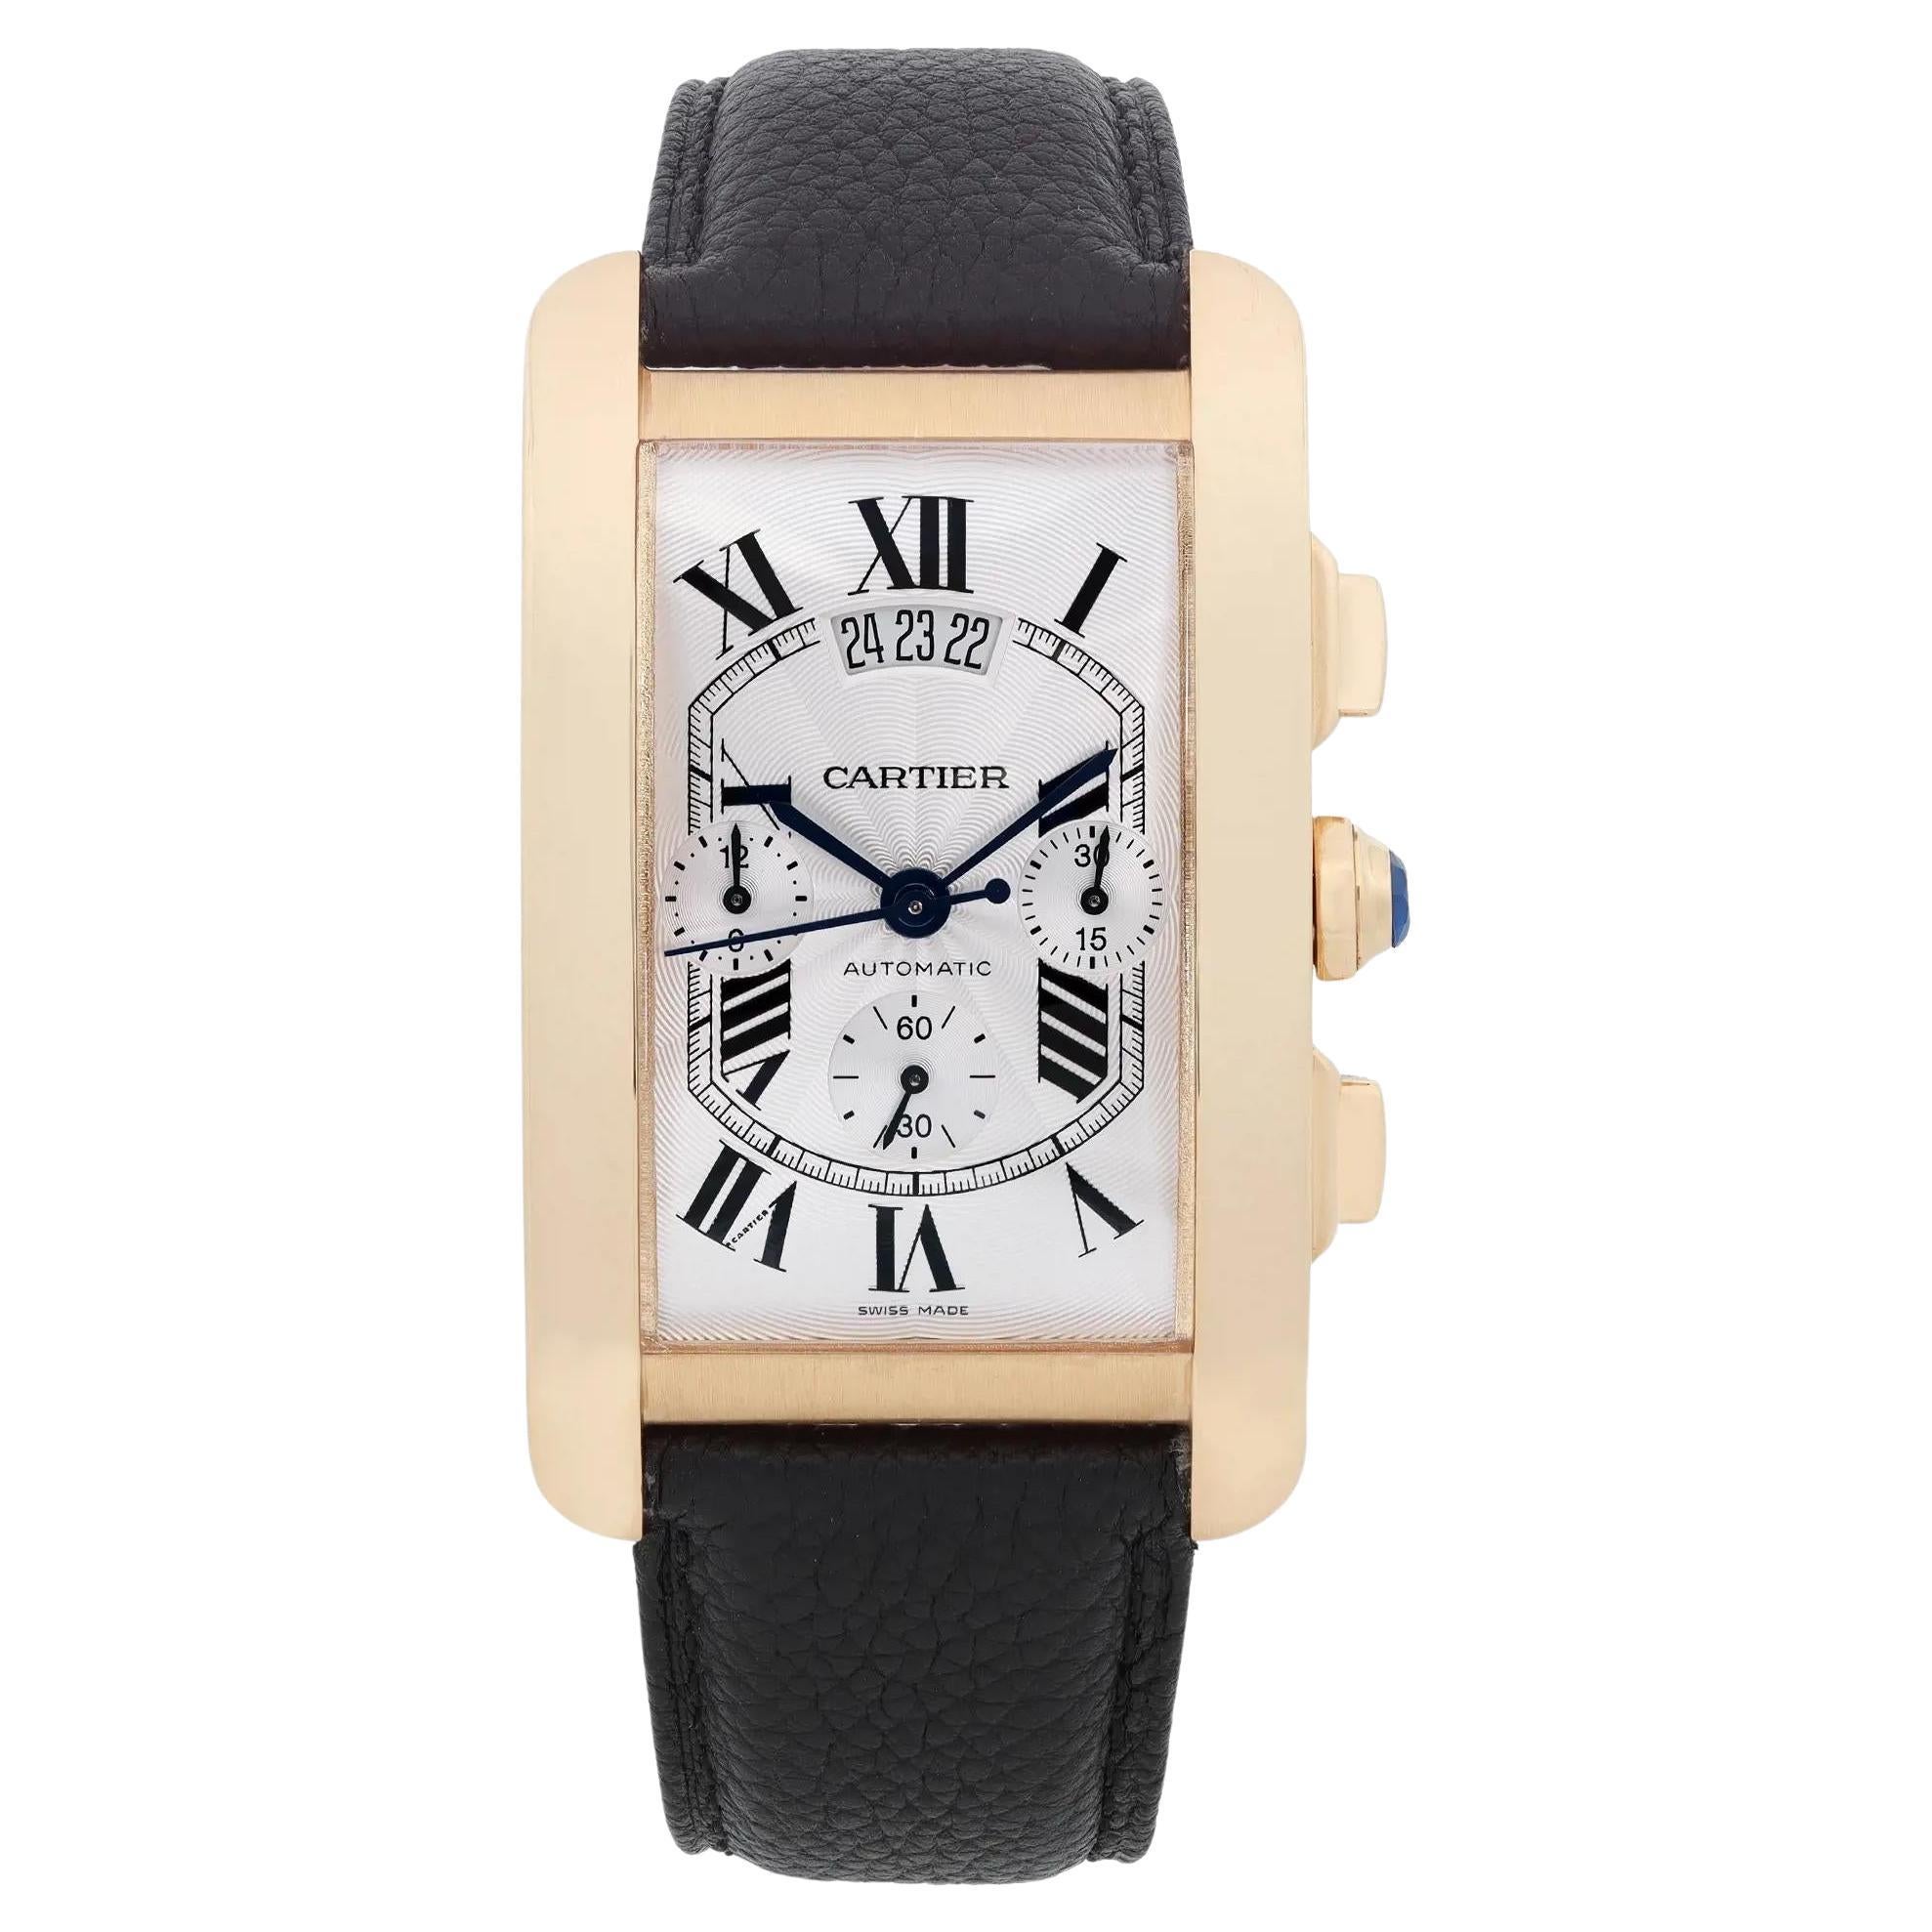 How do I know what Cartier Tank watch I have?